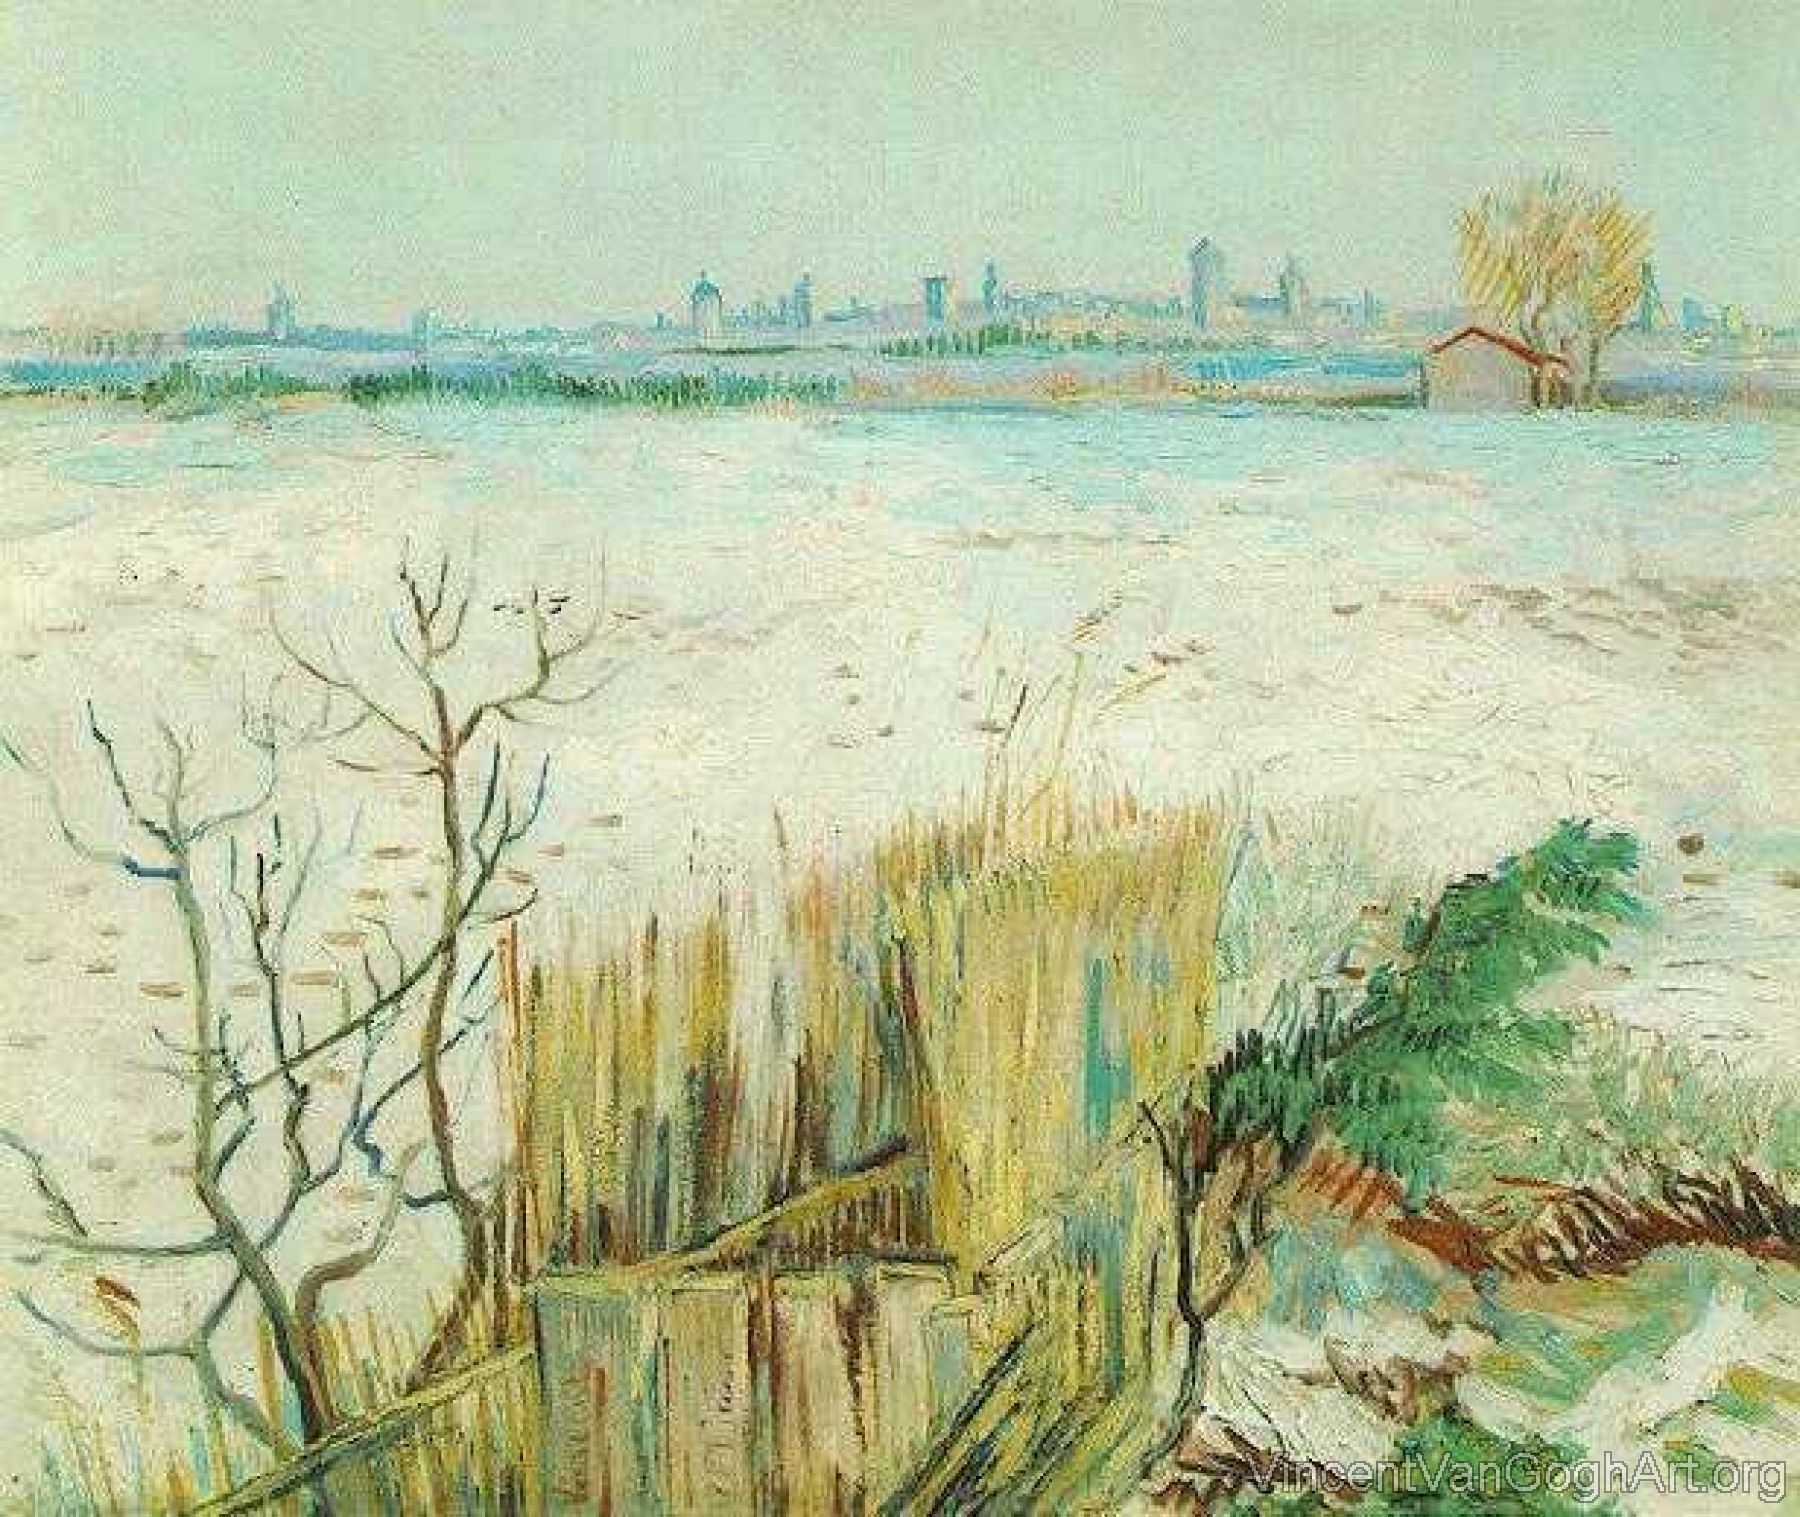 Snowy Landscape with Arles in the Background